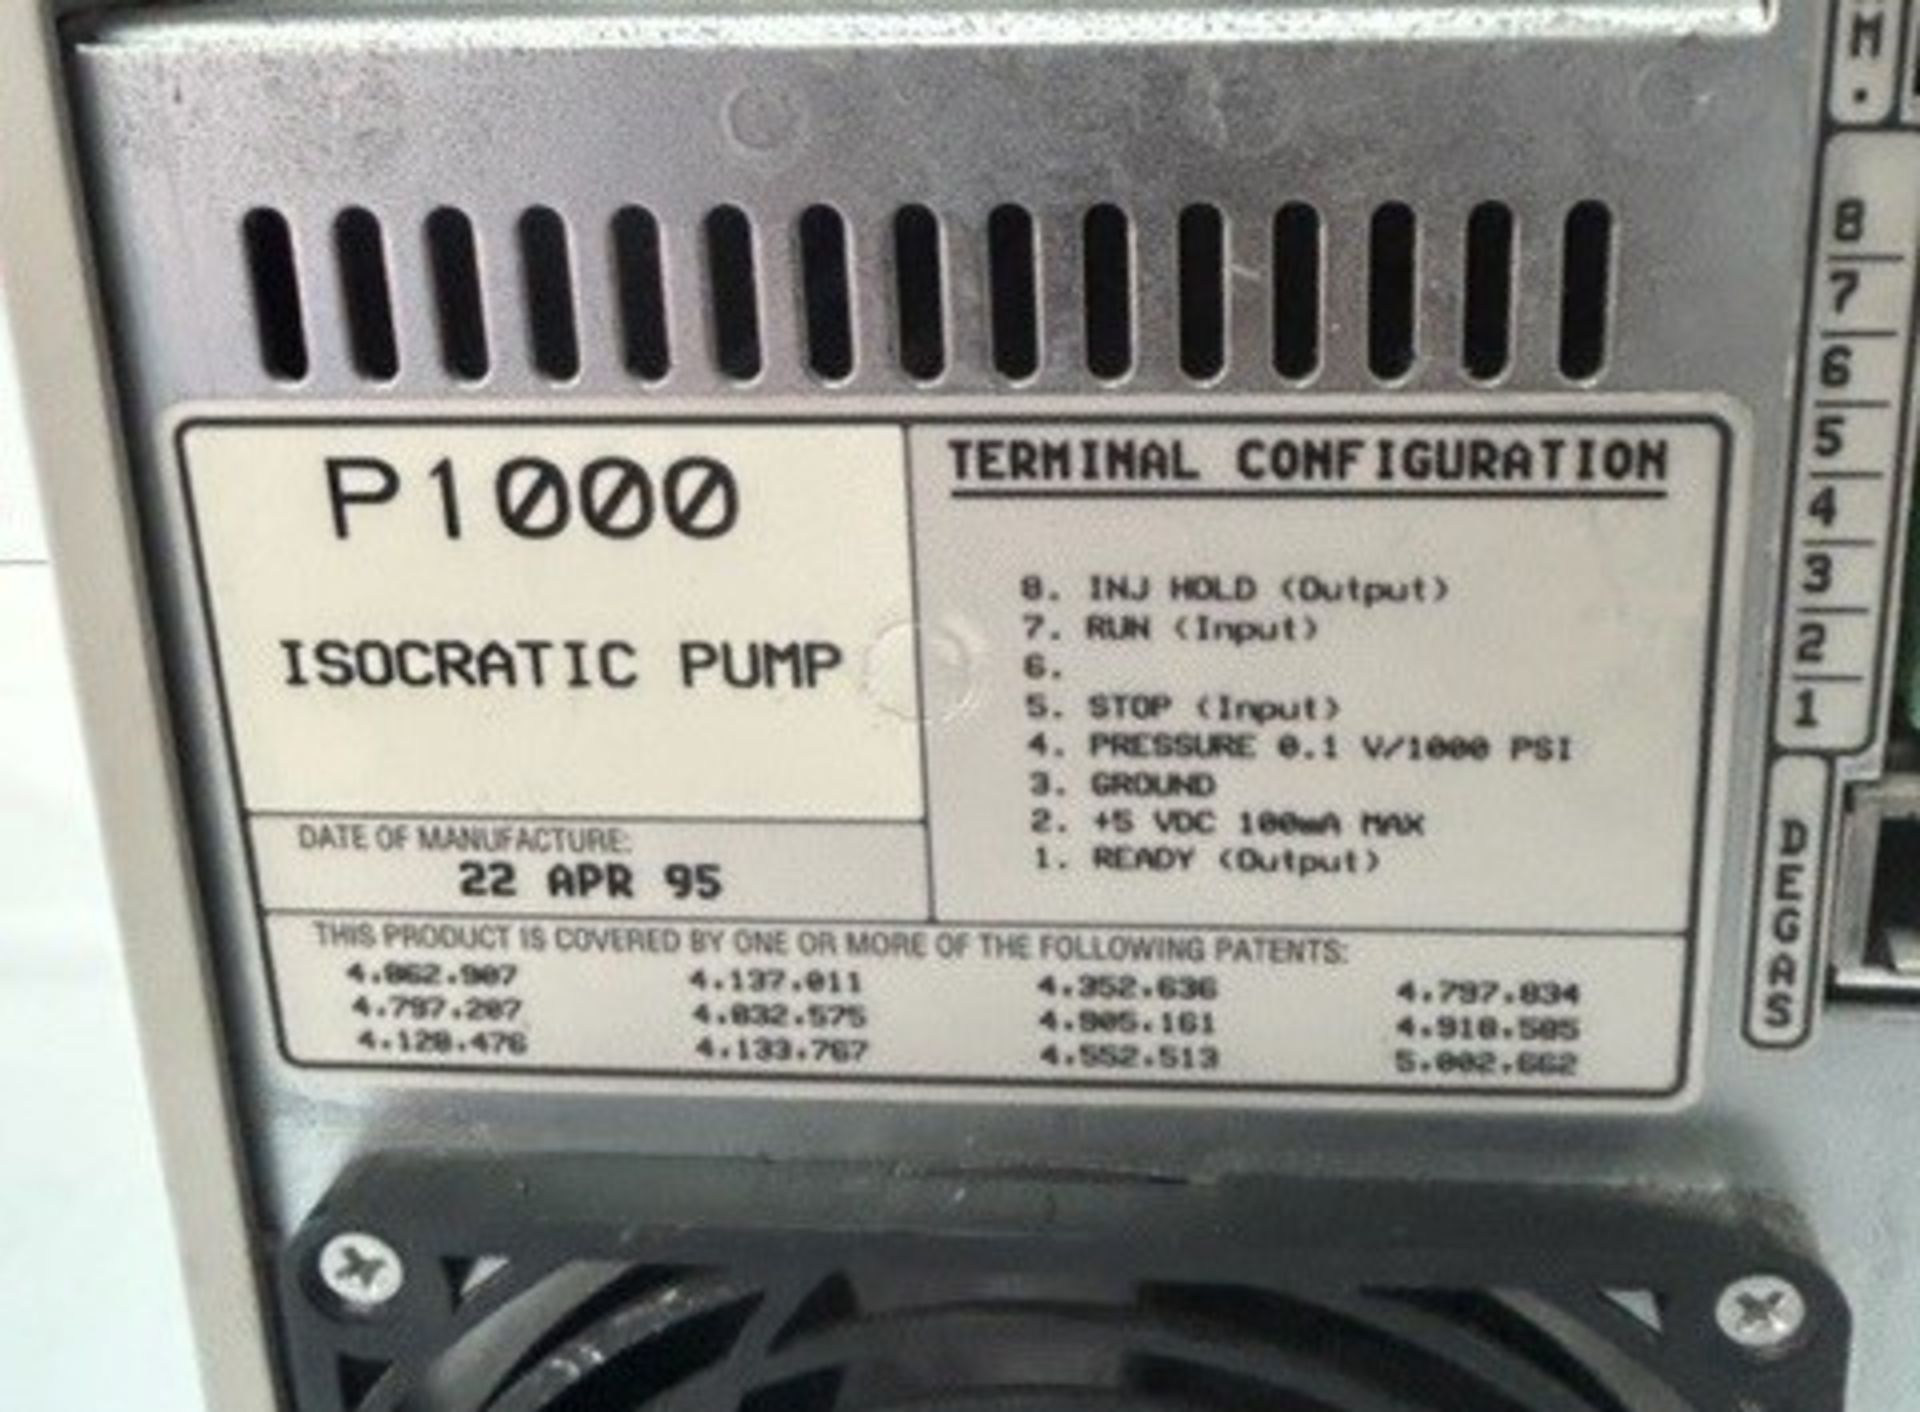 Thermo Isocratic Pump P1000 - Image 6 of 6